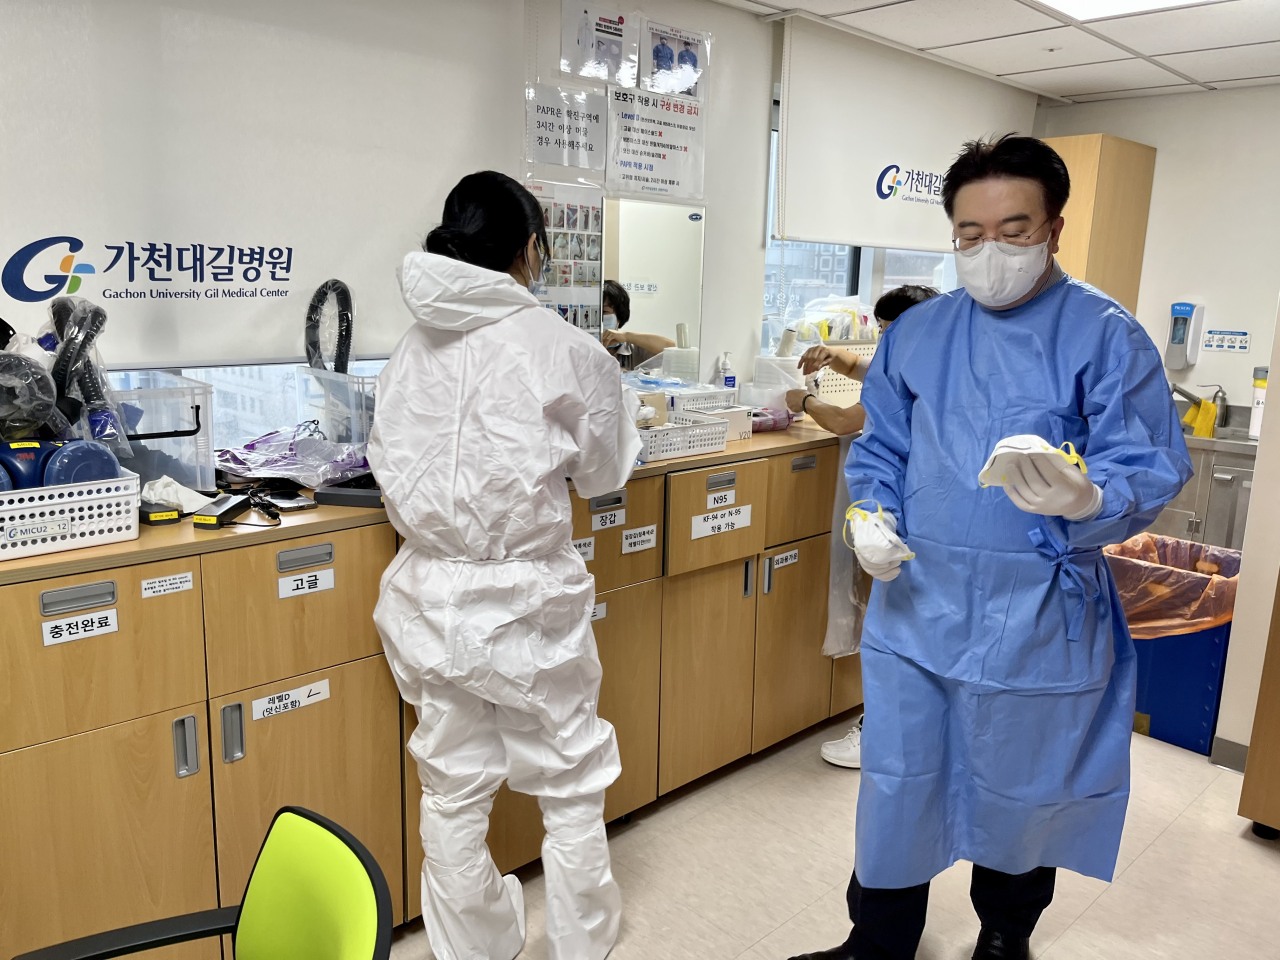 Nurses change into protective suits ahead of their evening shift on Christmas Eve. Dr. Eom, on the right, is seen holding an N95 respirator. (Kim Arin/The Korea Herald)